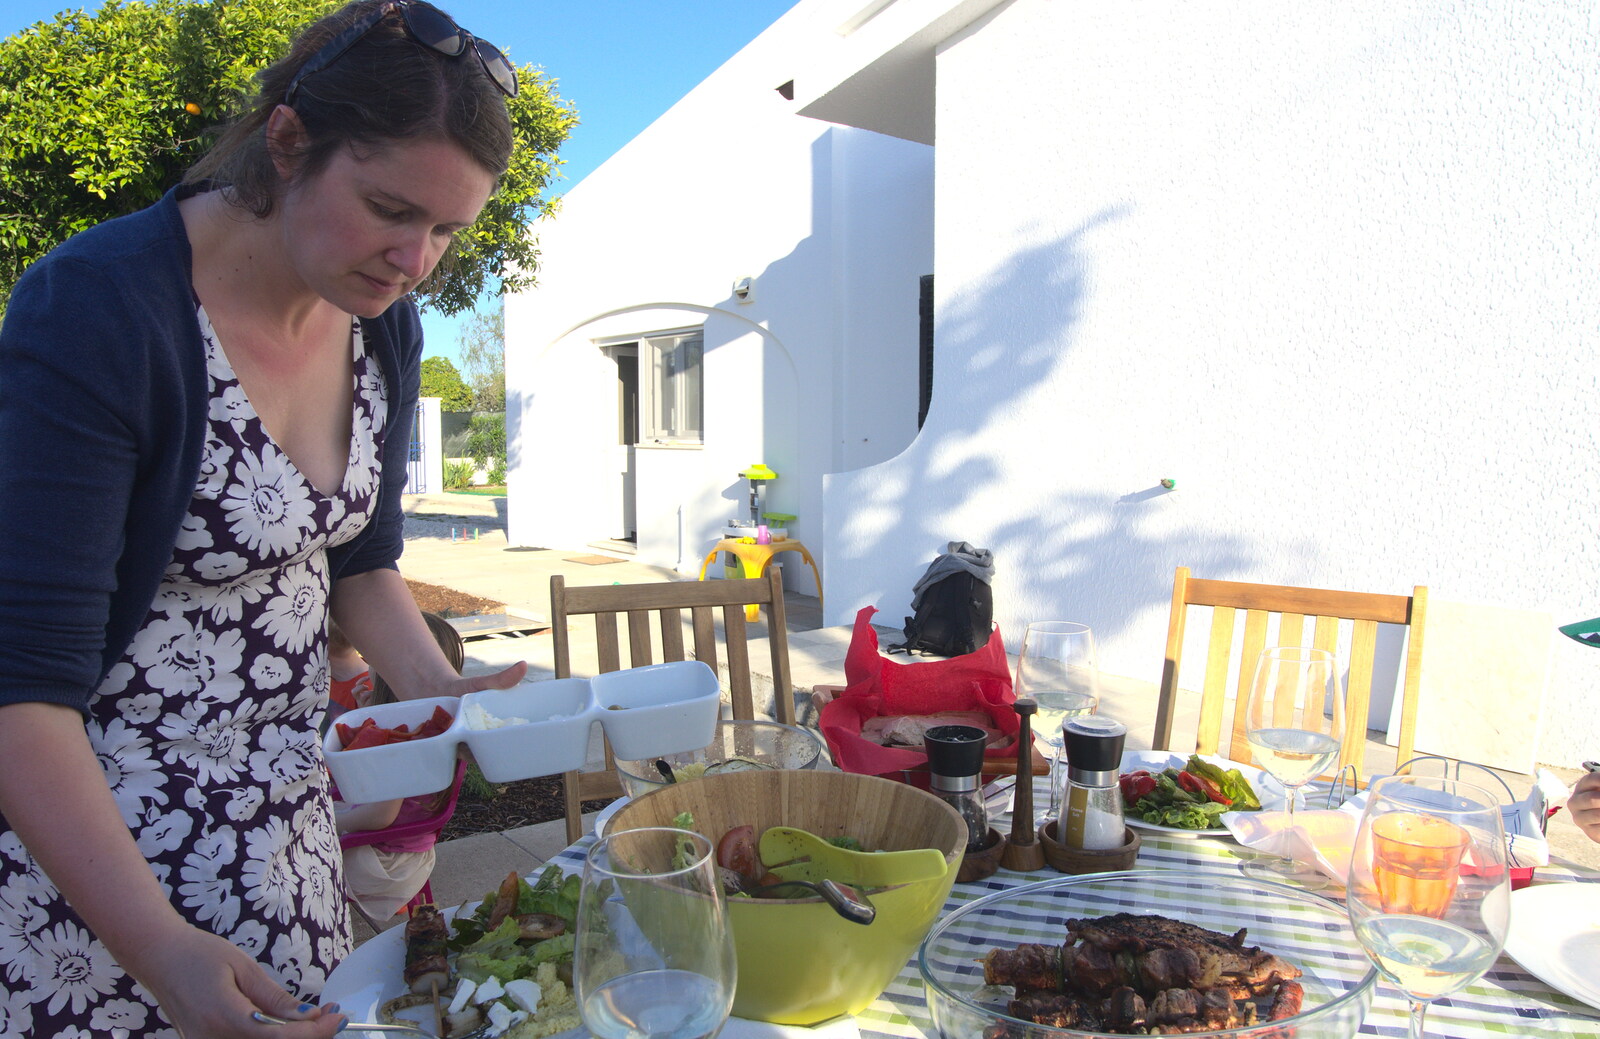 Isobel loads up from Gary and Vanessa's Barbeque, Alcantarilha, Algarve, Portugal - 7th April 2016